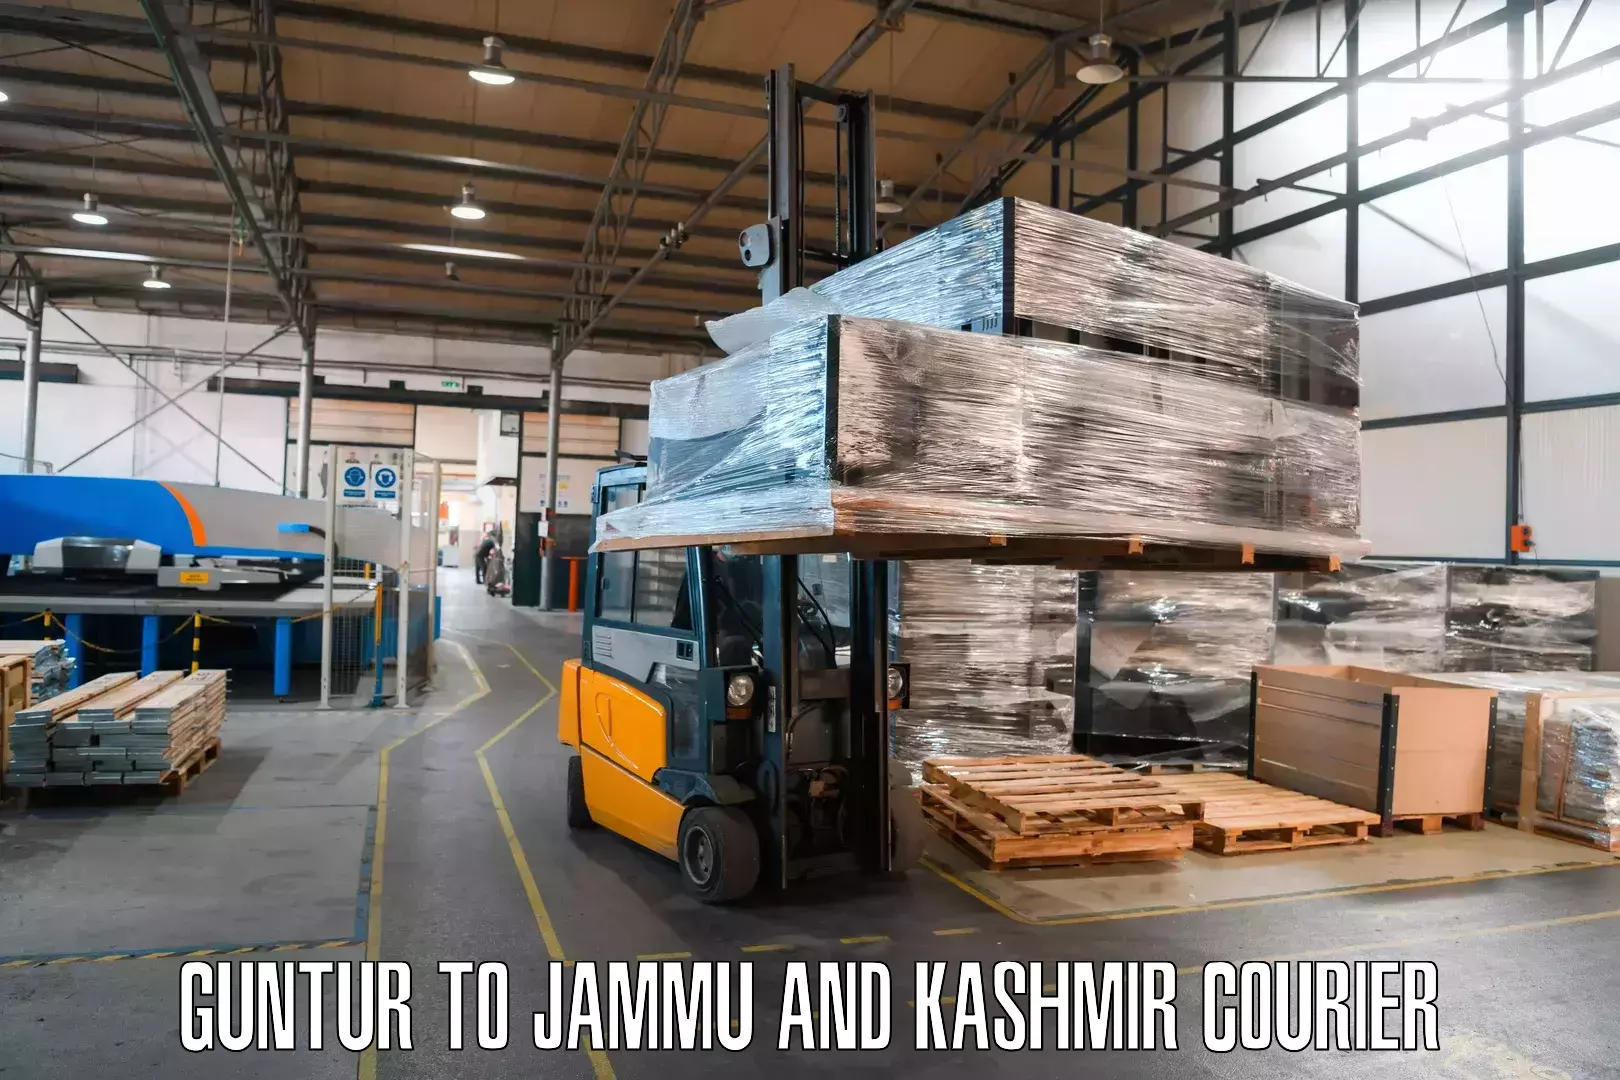 Multi-national courier services Guntur to Jammu and Kashmir